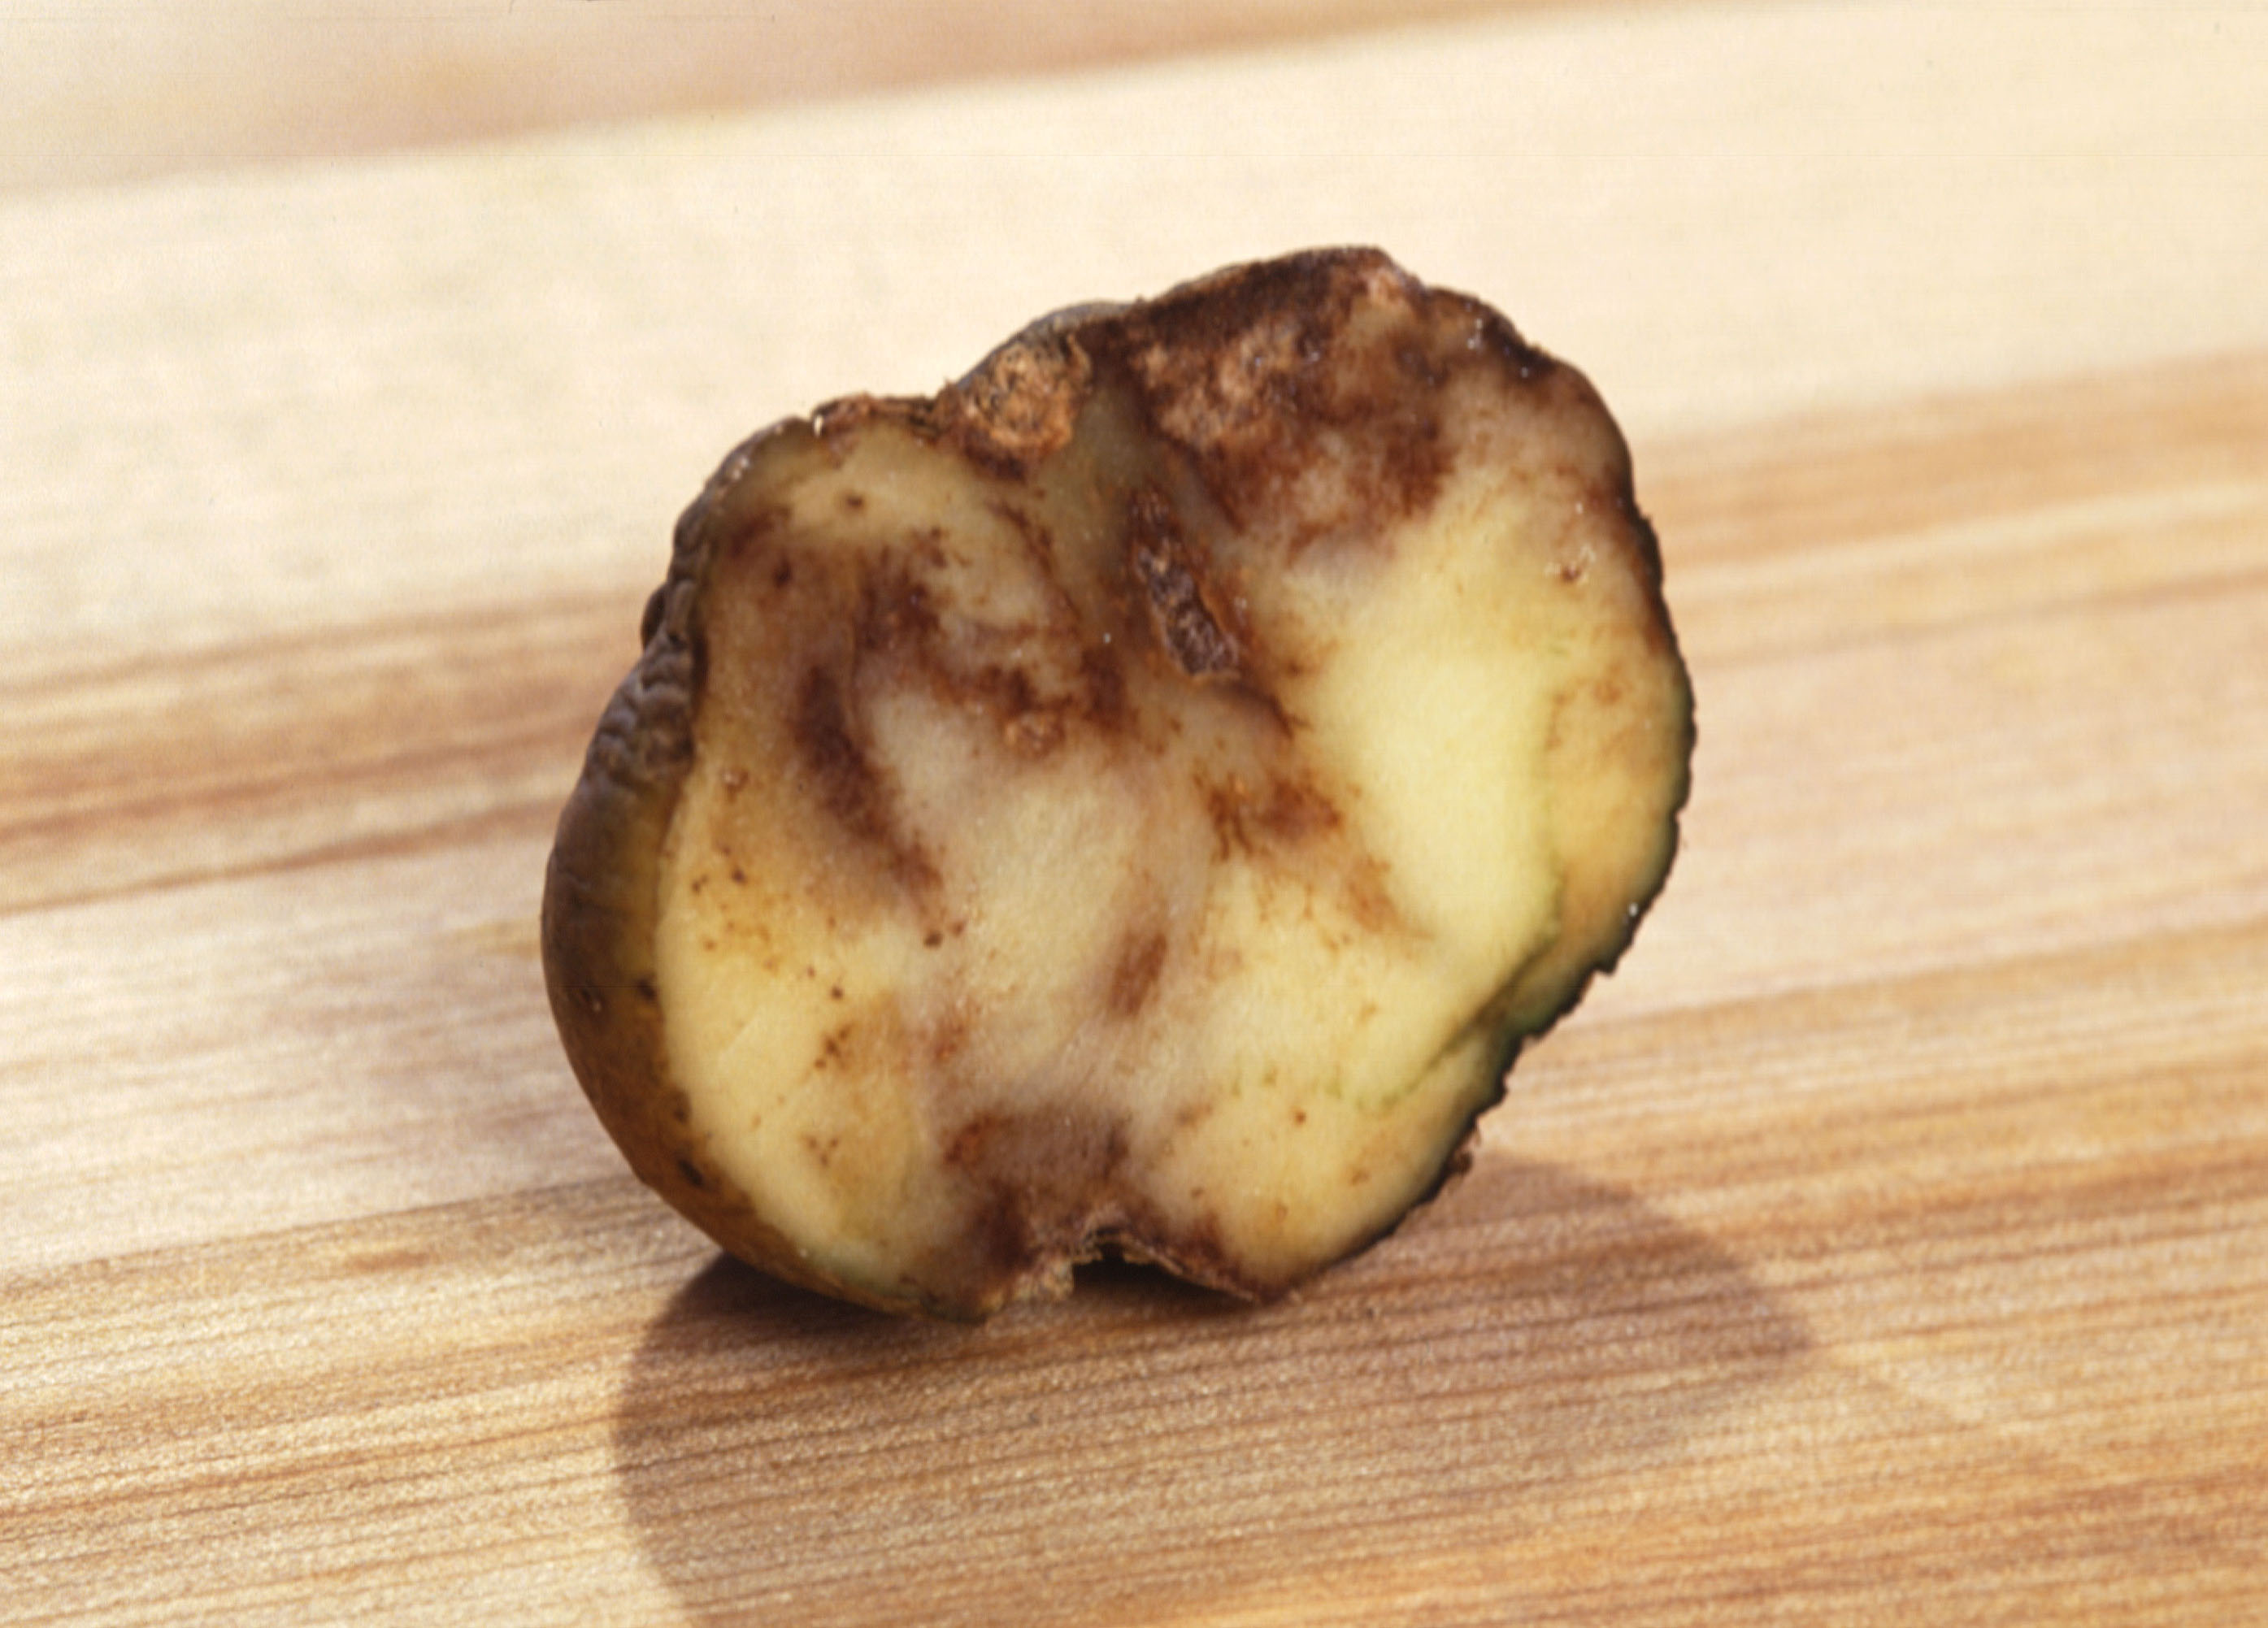 A potato infected with potato blight cut in half on a wooden table. The potato has dark brown discoloration on the inside.